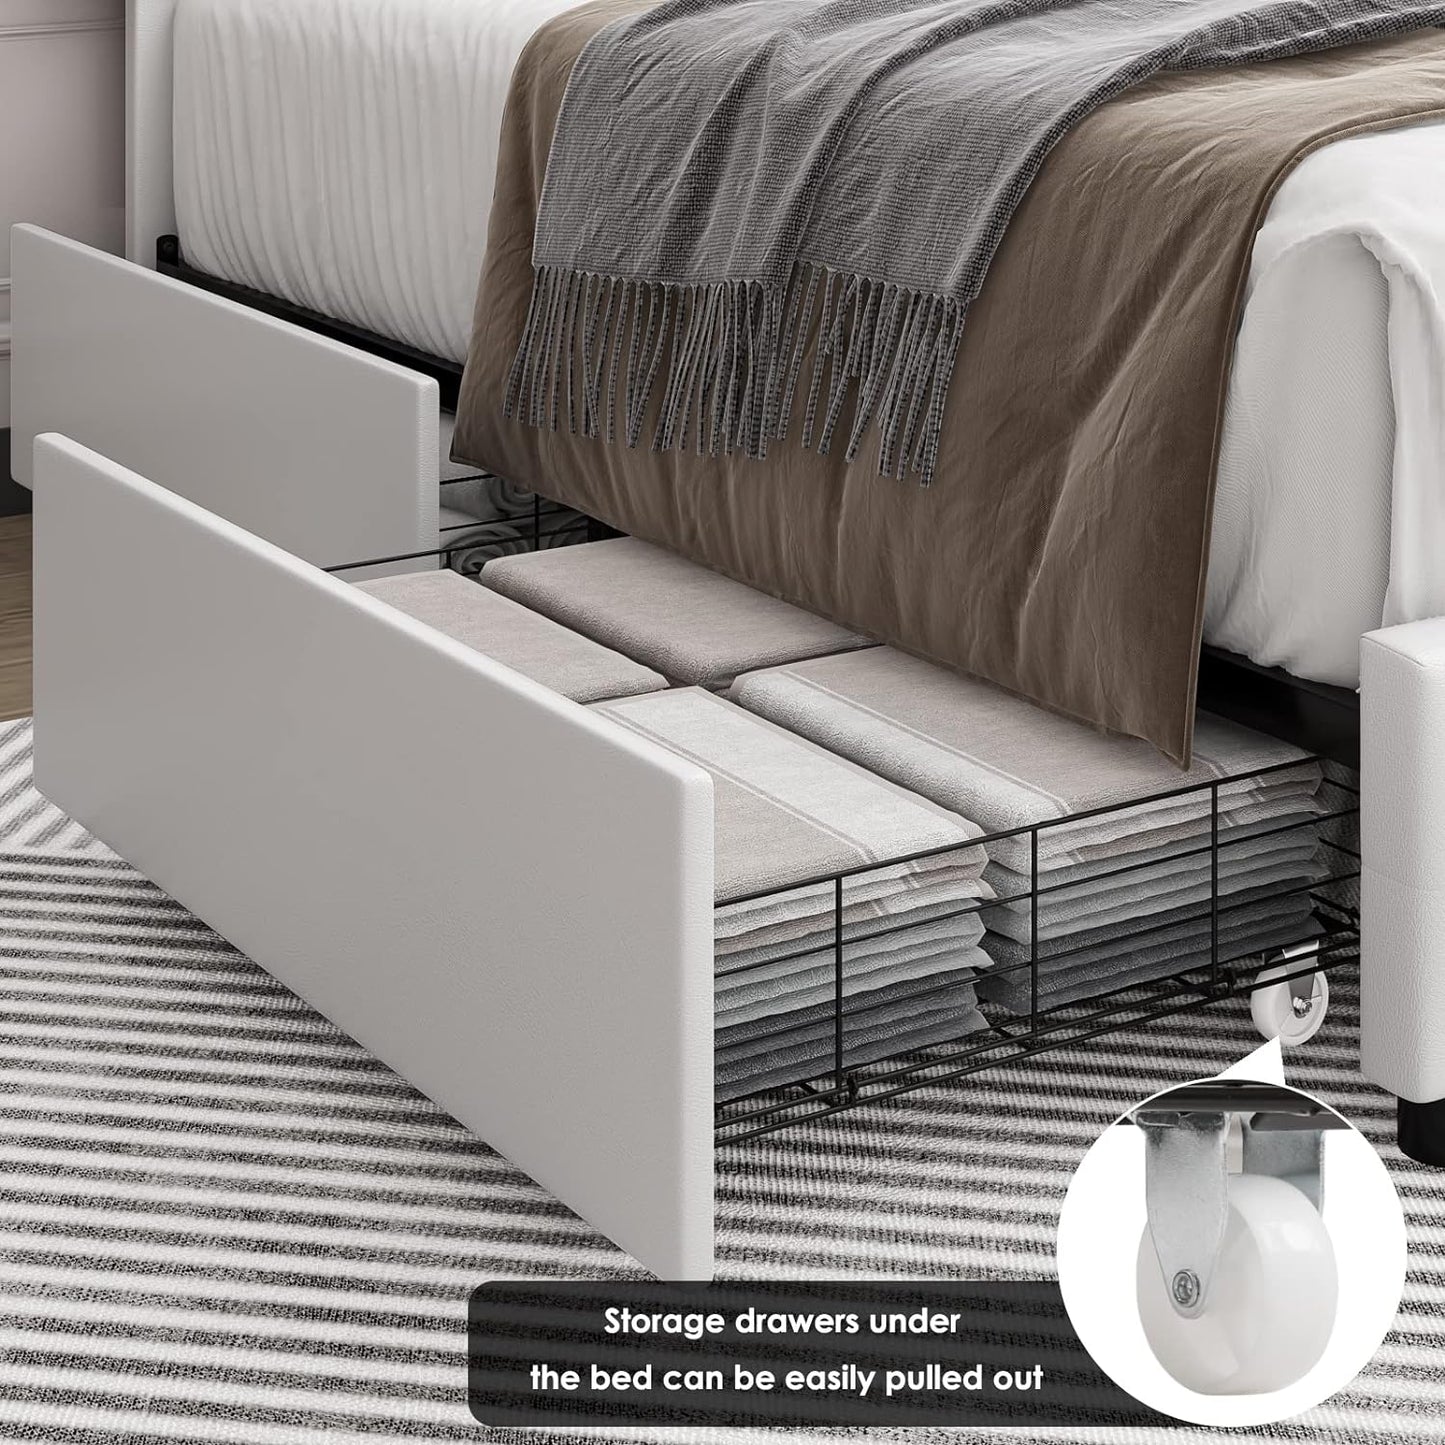 Modern Upholstered Bed Frame with 4 Drawers, Button Tufted Headboard Design, Solid Wooden Slat Support, Easy Assembly, Queen Size, White